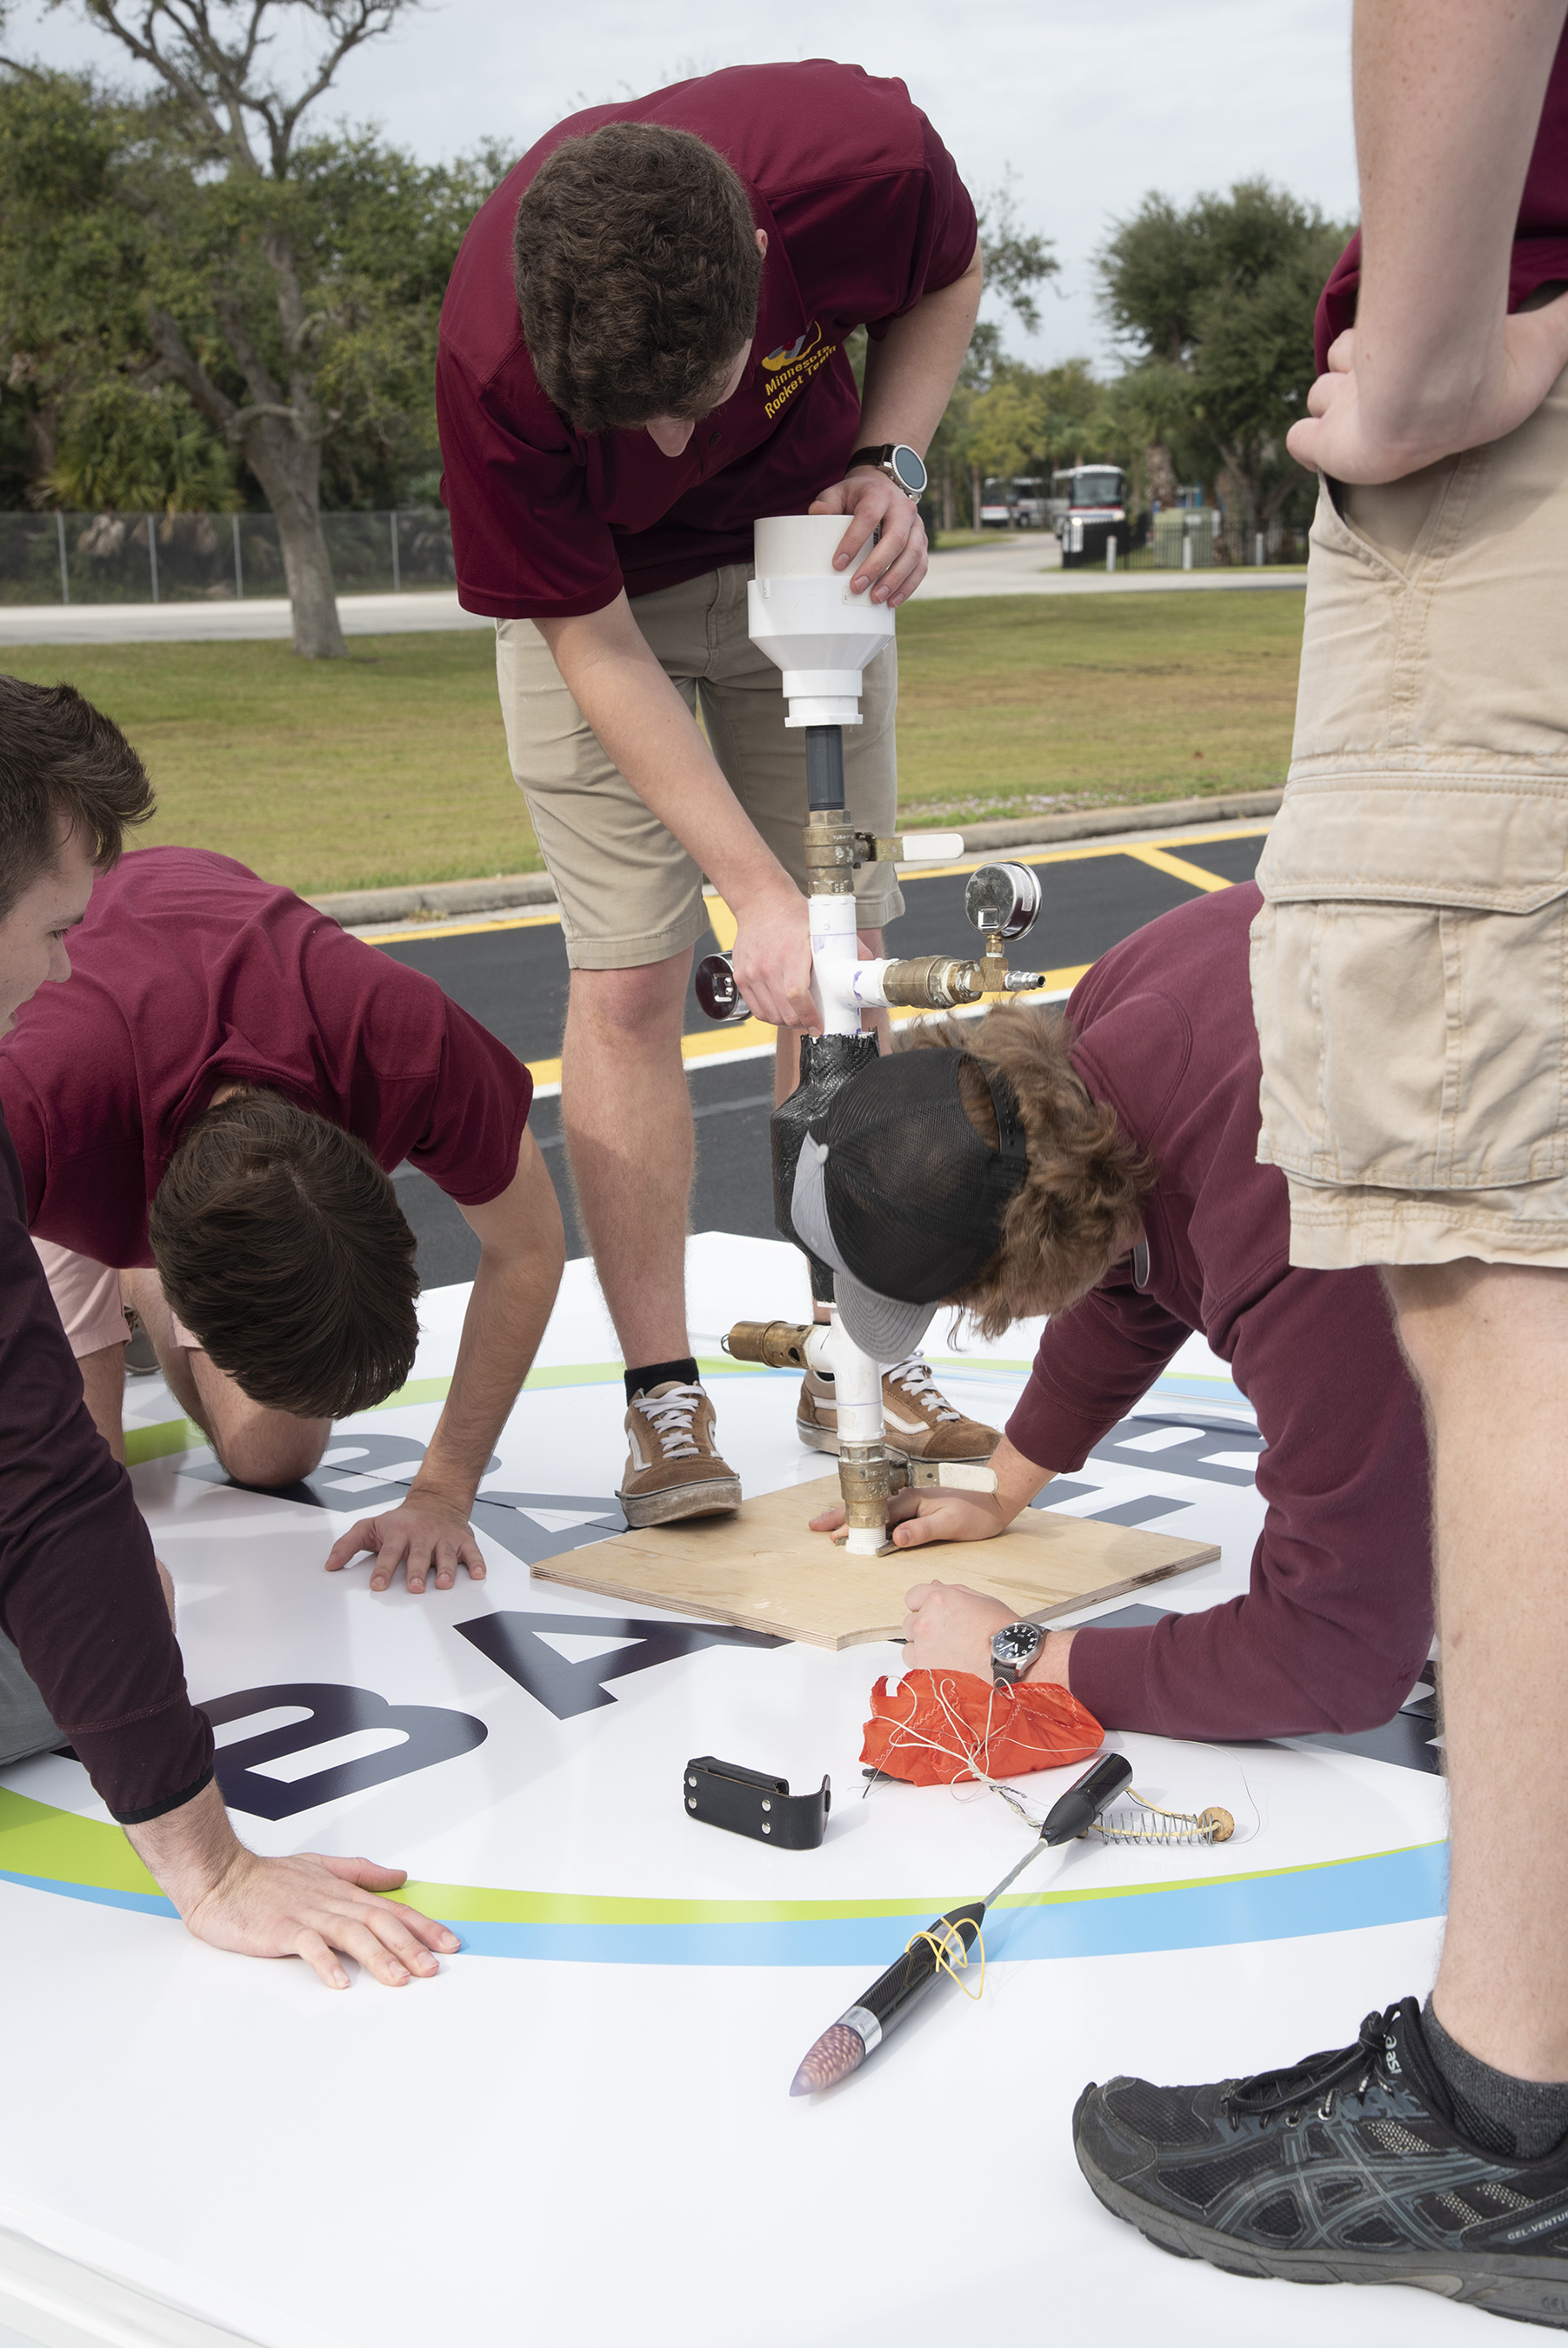 The team from the University of Minnesota prepares to launch their rocket at the 2019 Alka-Rocket Challenge on Thursday.